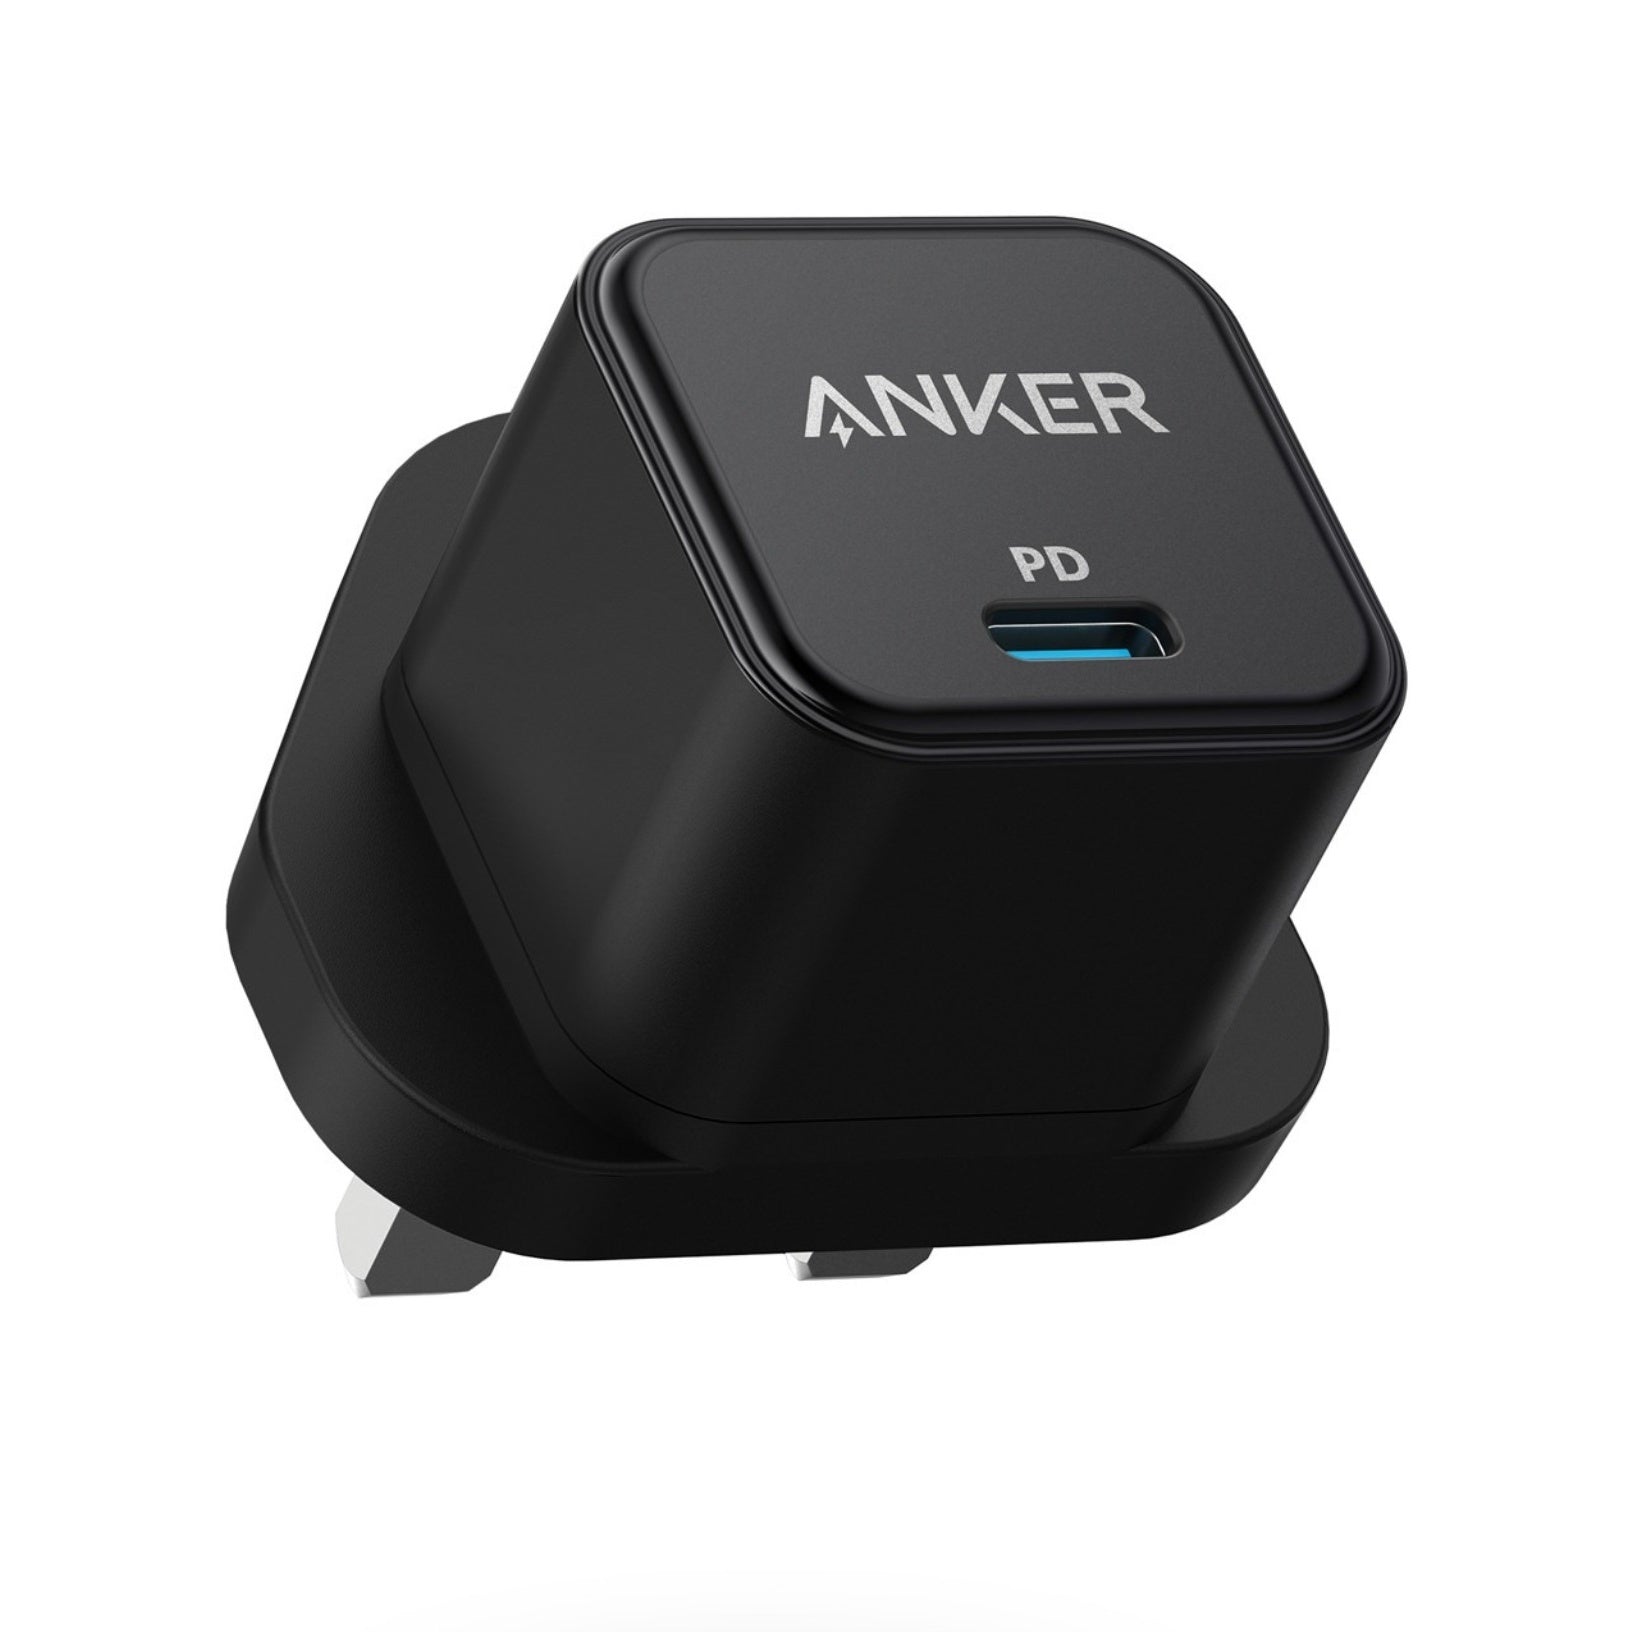 Anker Powerport III USB-C 20W Portable Charger